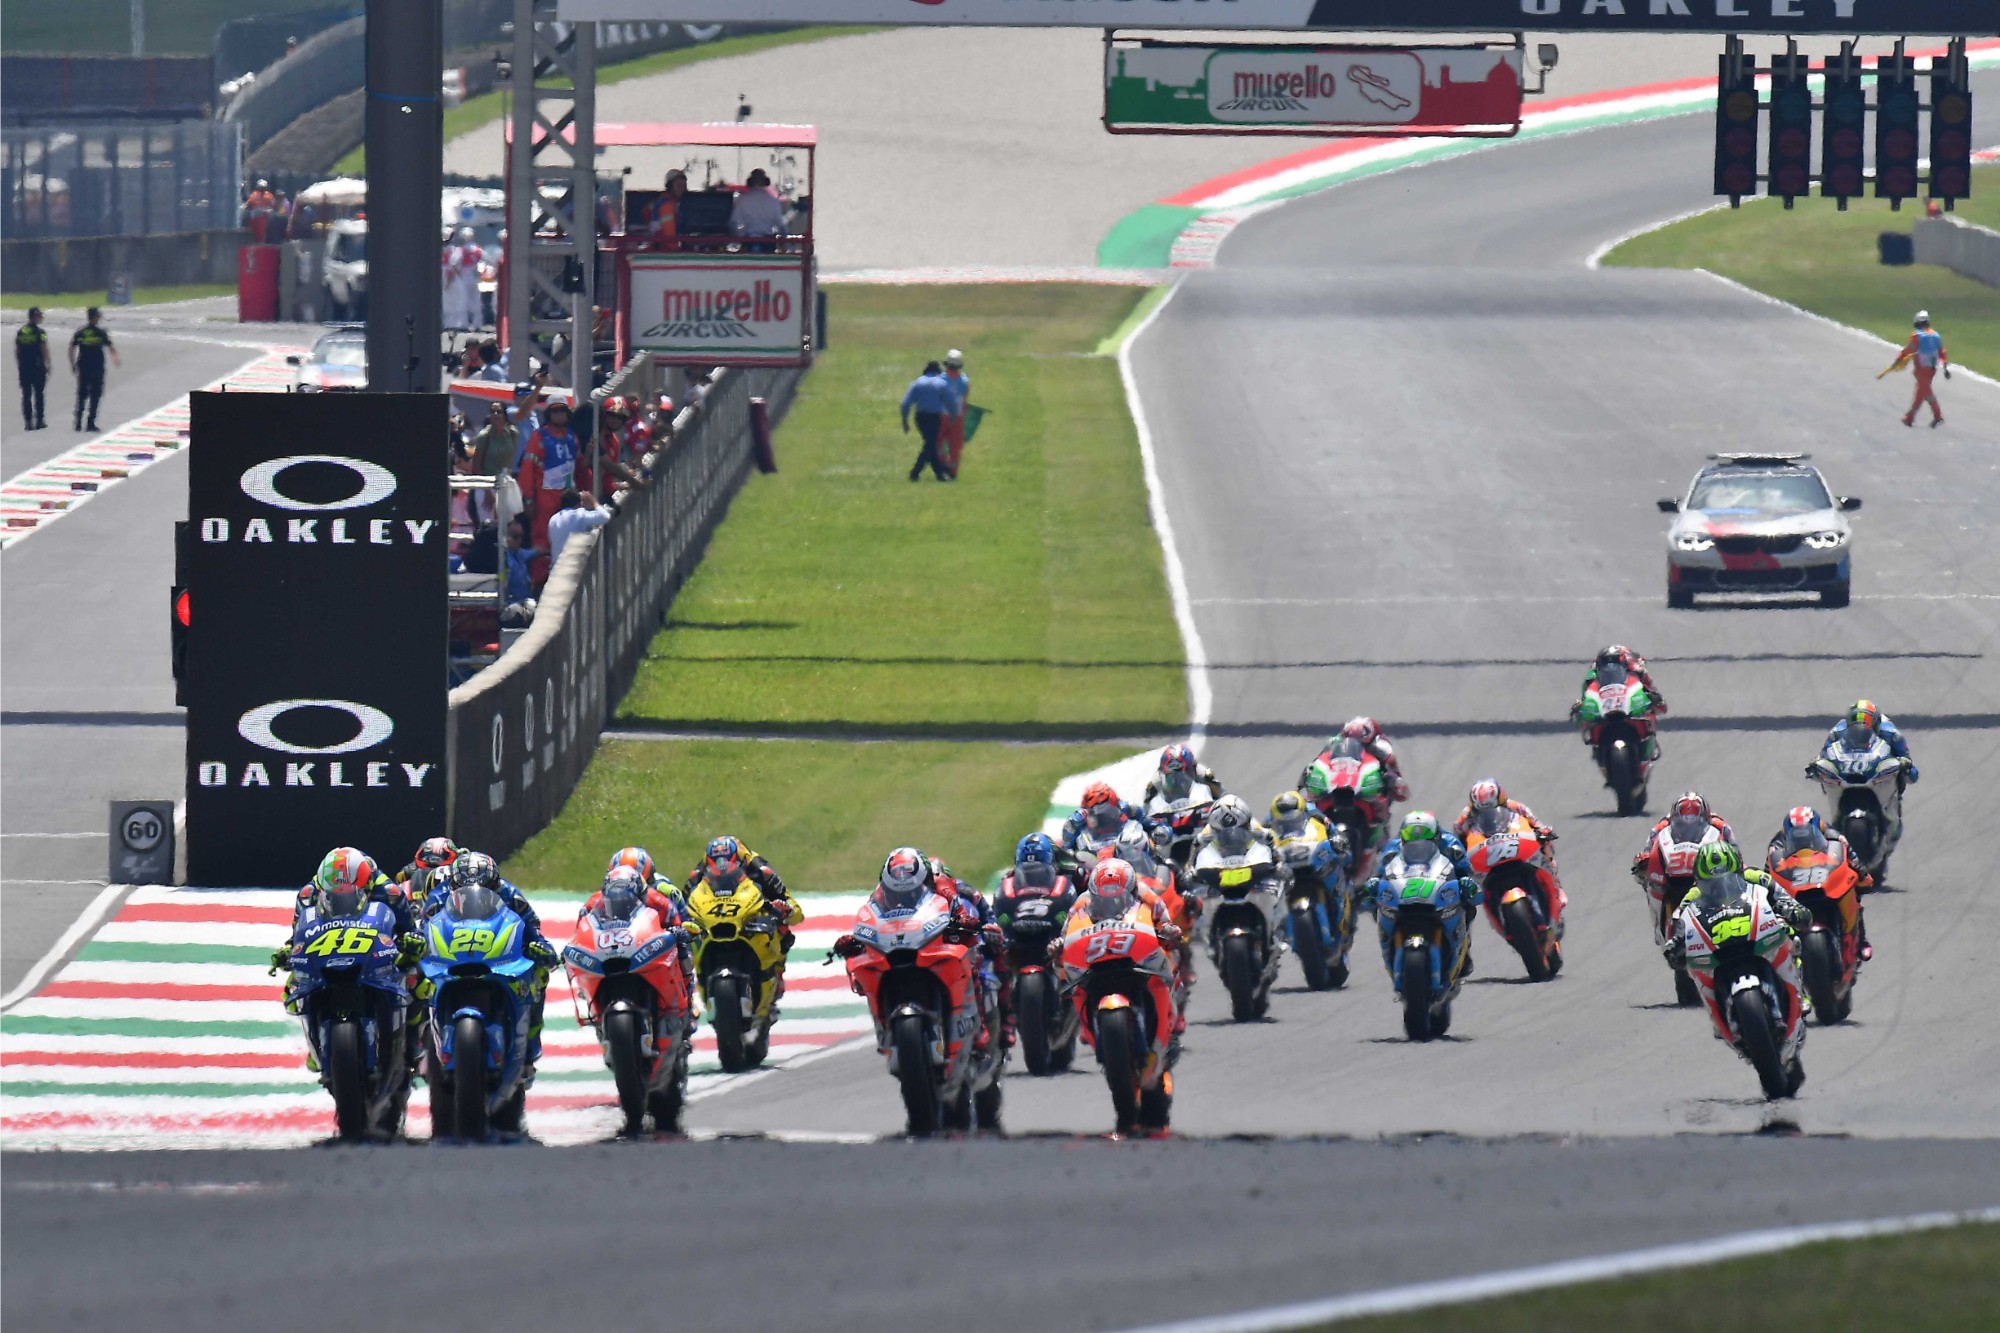 MotoGP And World Superbike Will Continue To Be Broadcast On beIN SPORTS In North America In 2019